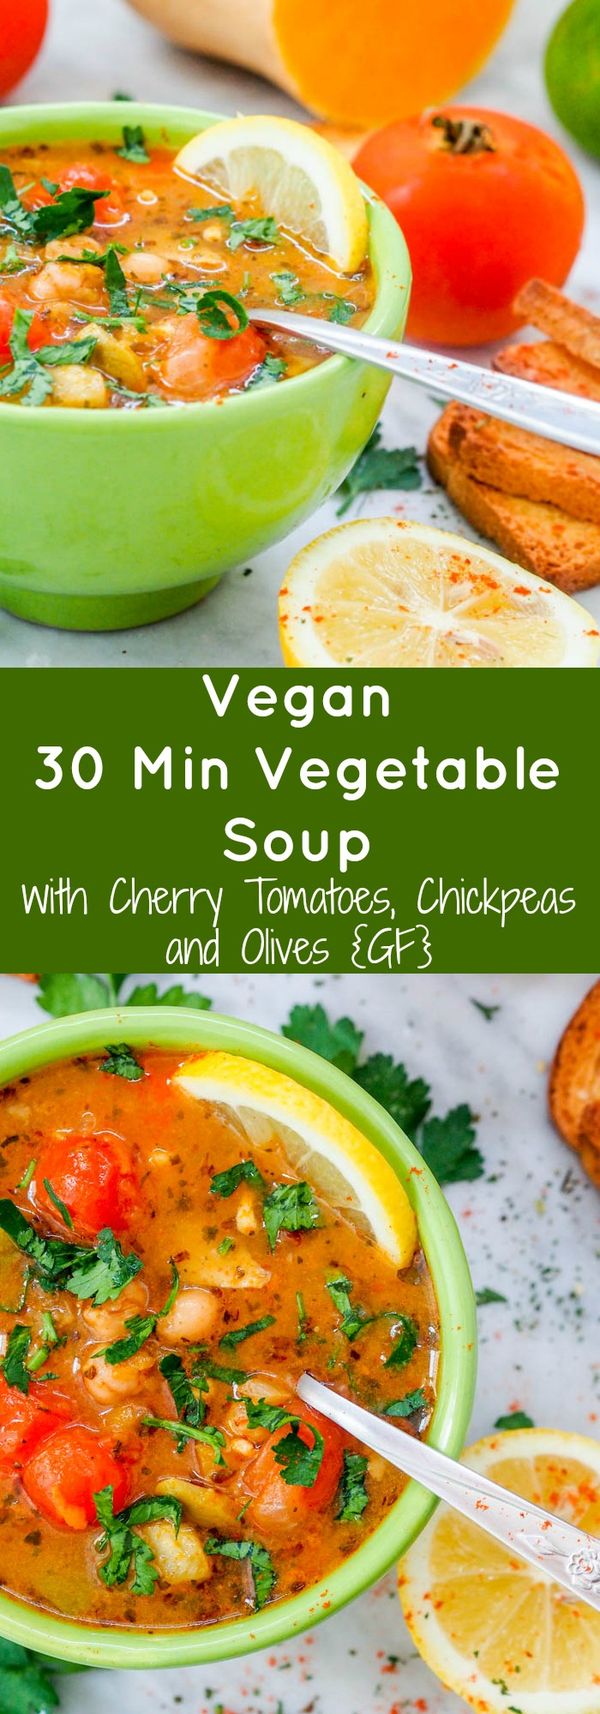 Vegan Vegetable Soup with Cherry Tomatoes and Chickpeas (GF